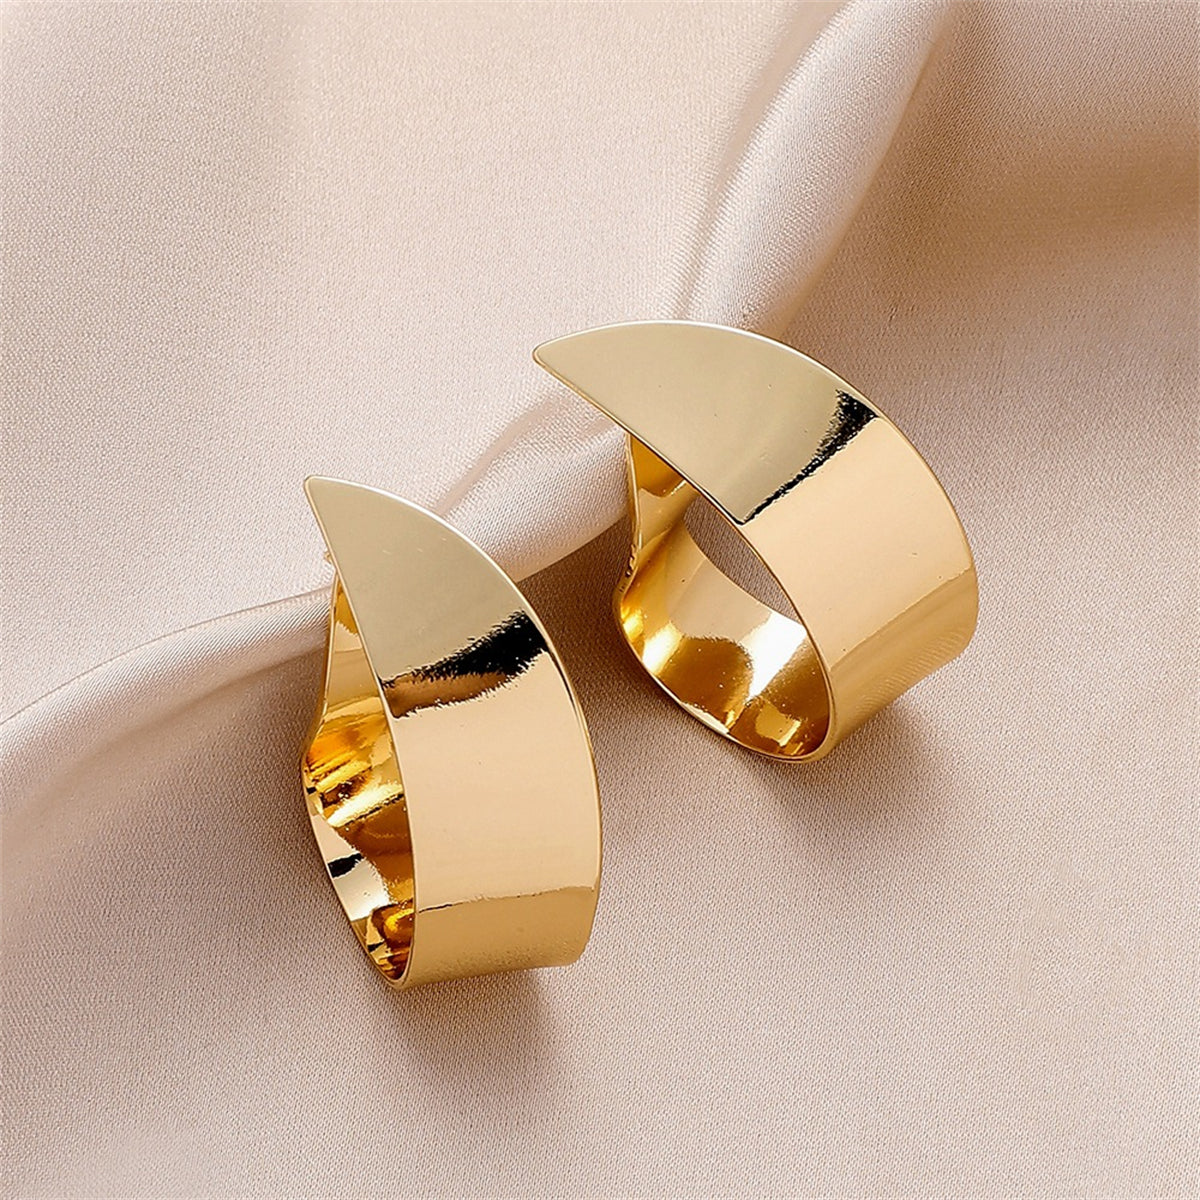 18K Gold-Plated Curved Stud Earrings